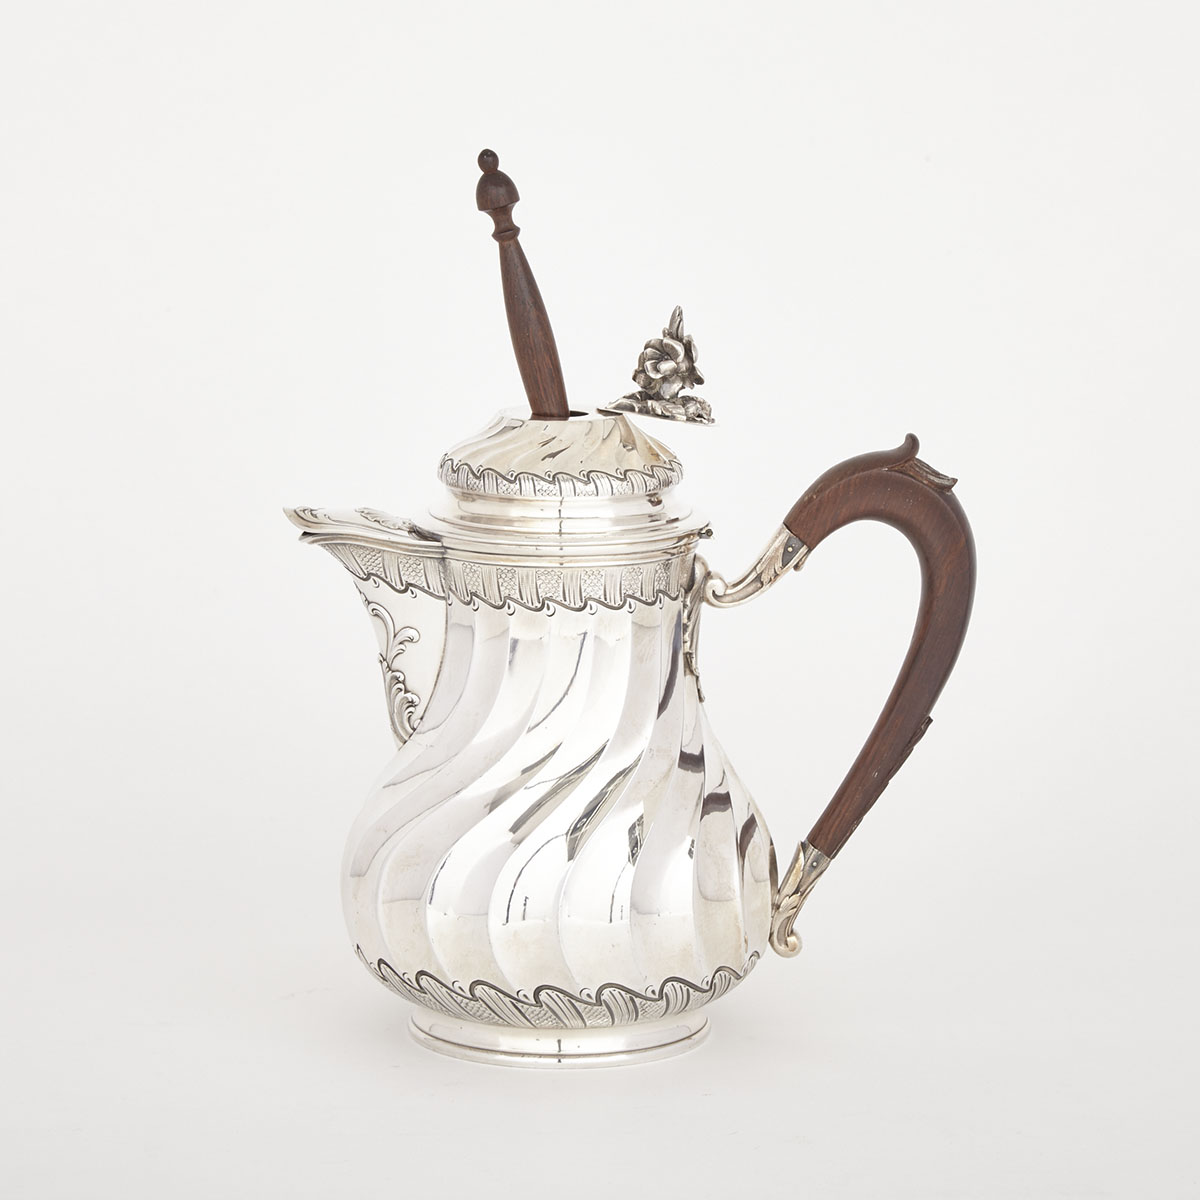 French Silver Chocolate Pot, L’Atelier Moderne d’Orfèvrerie, c.1900